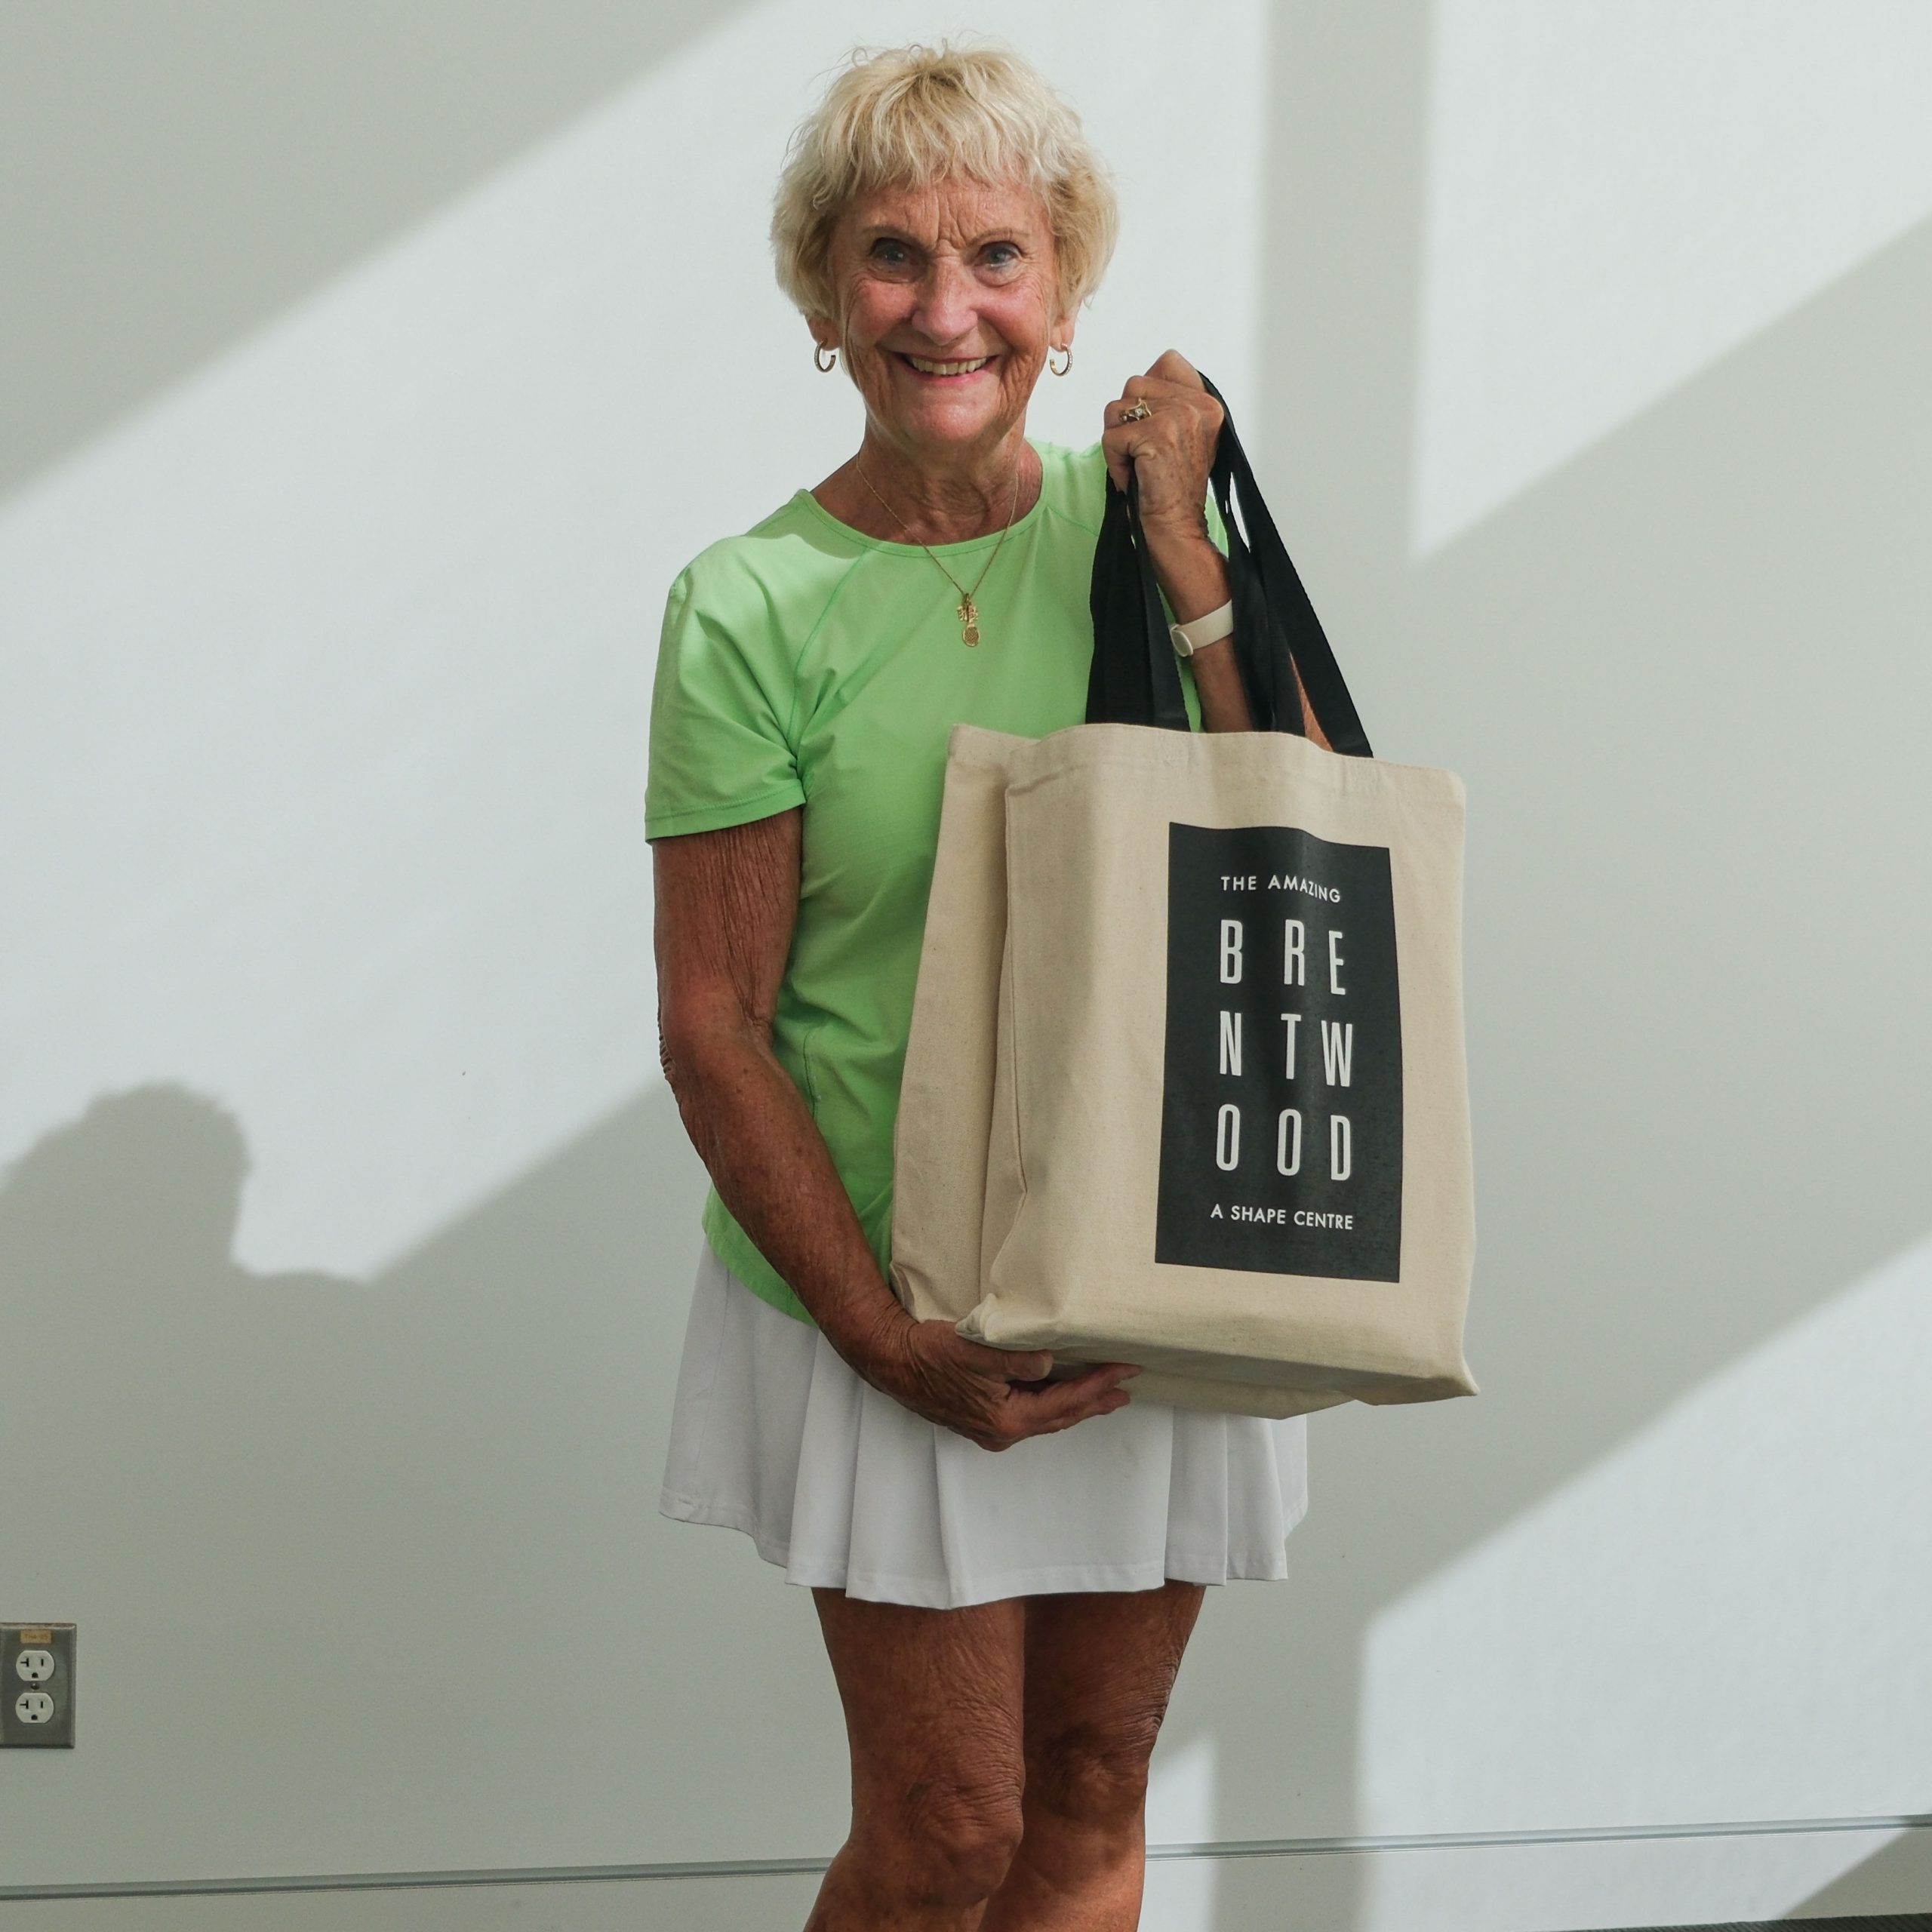 Gwen won the Burnaby Shopping Weekend Stay and Play prize package.